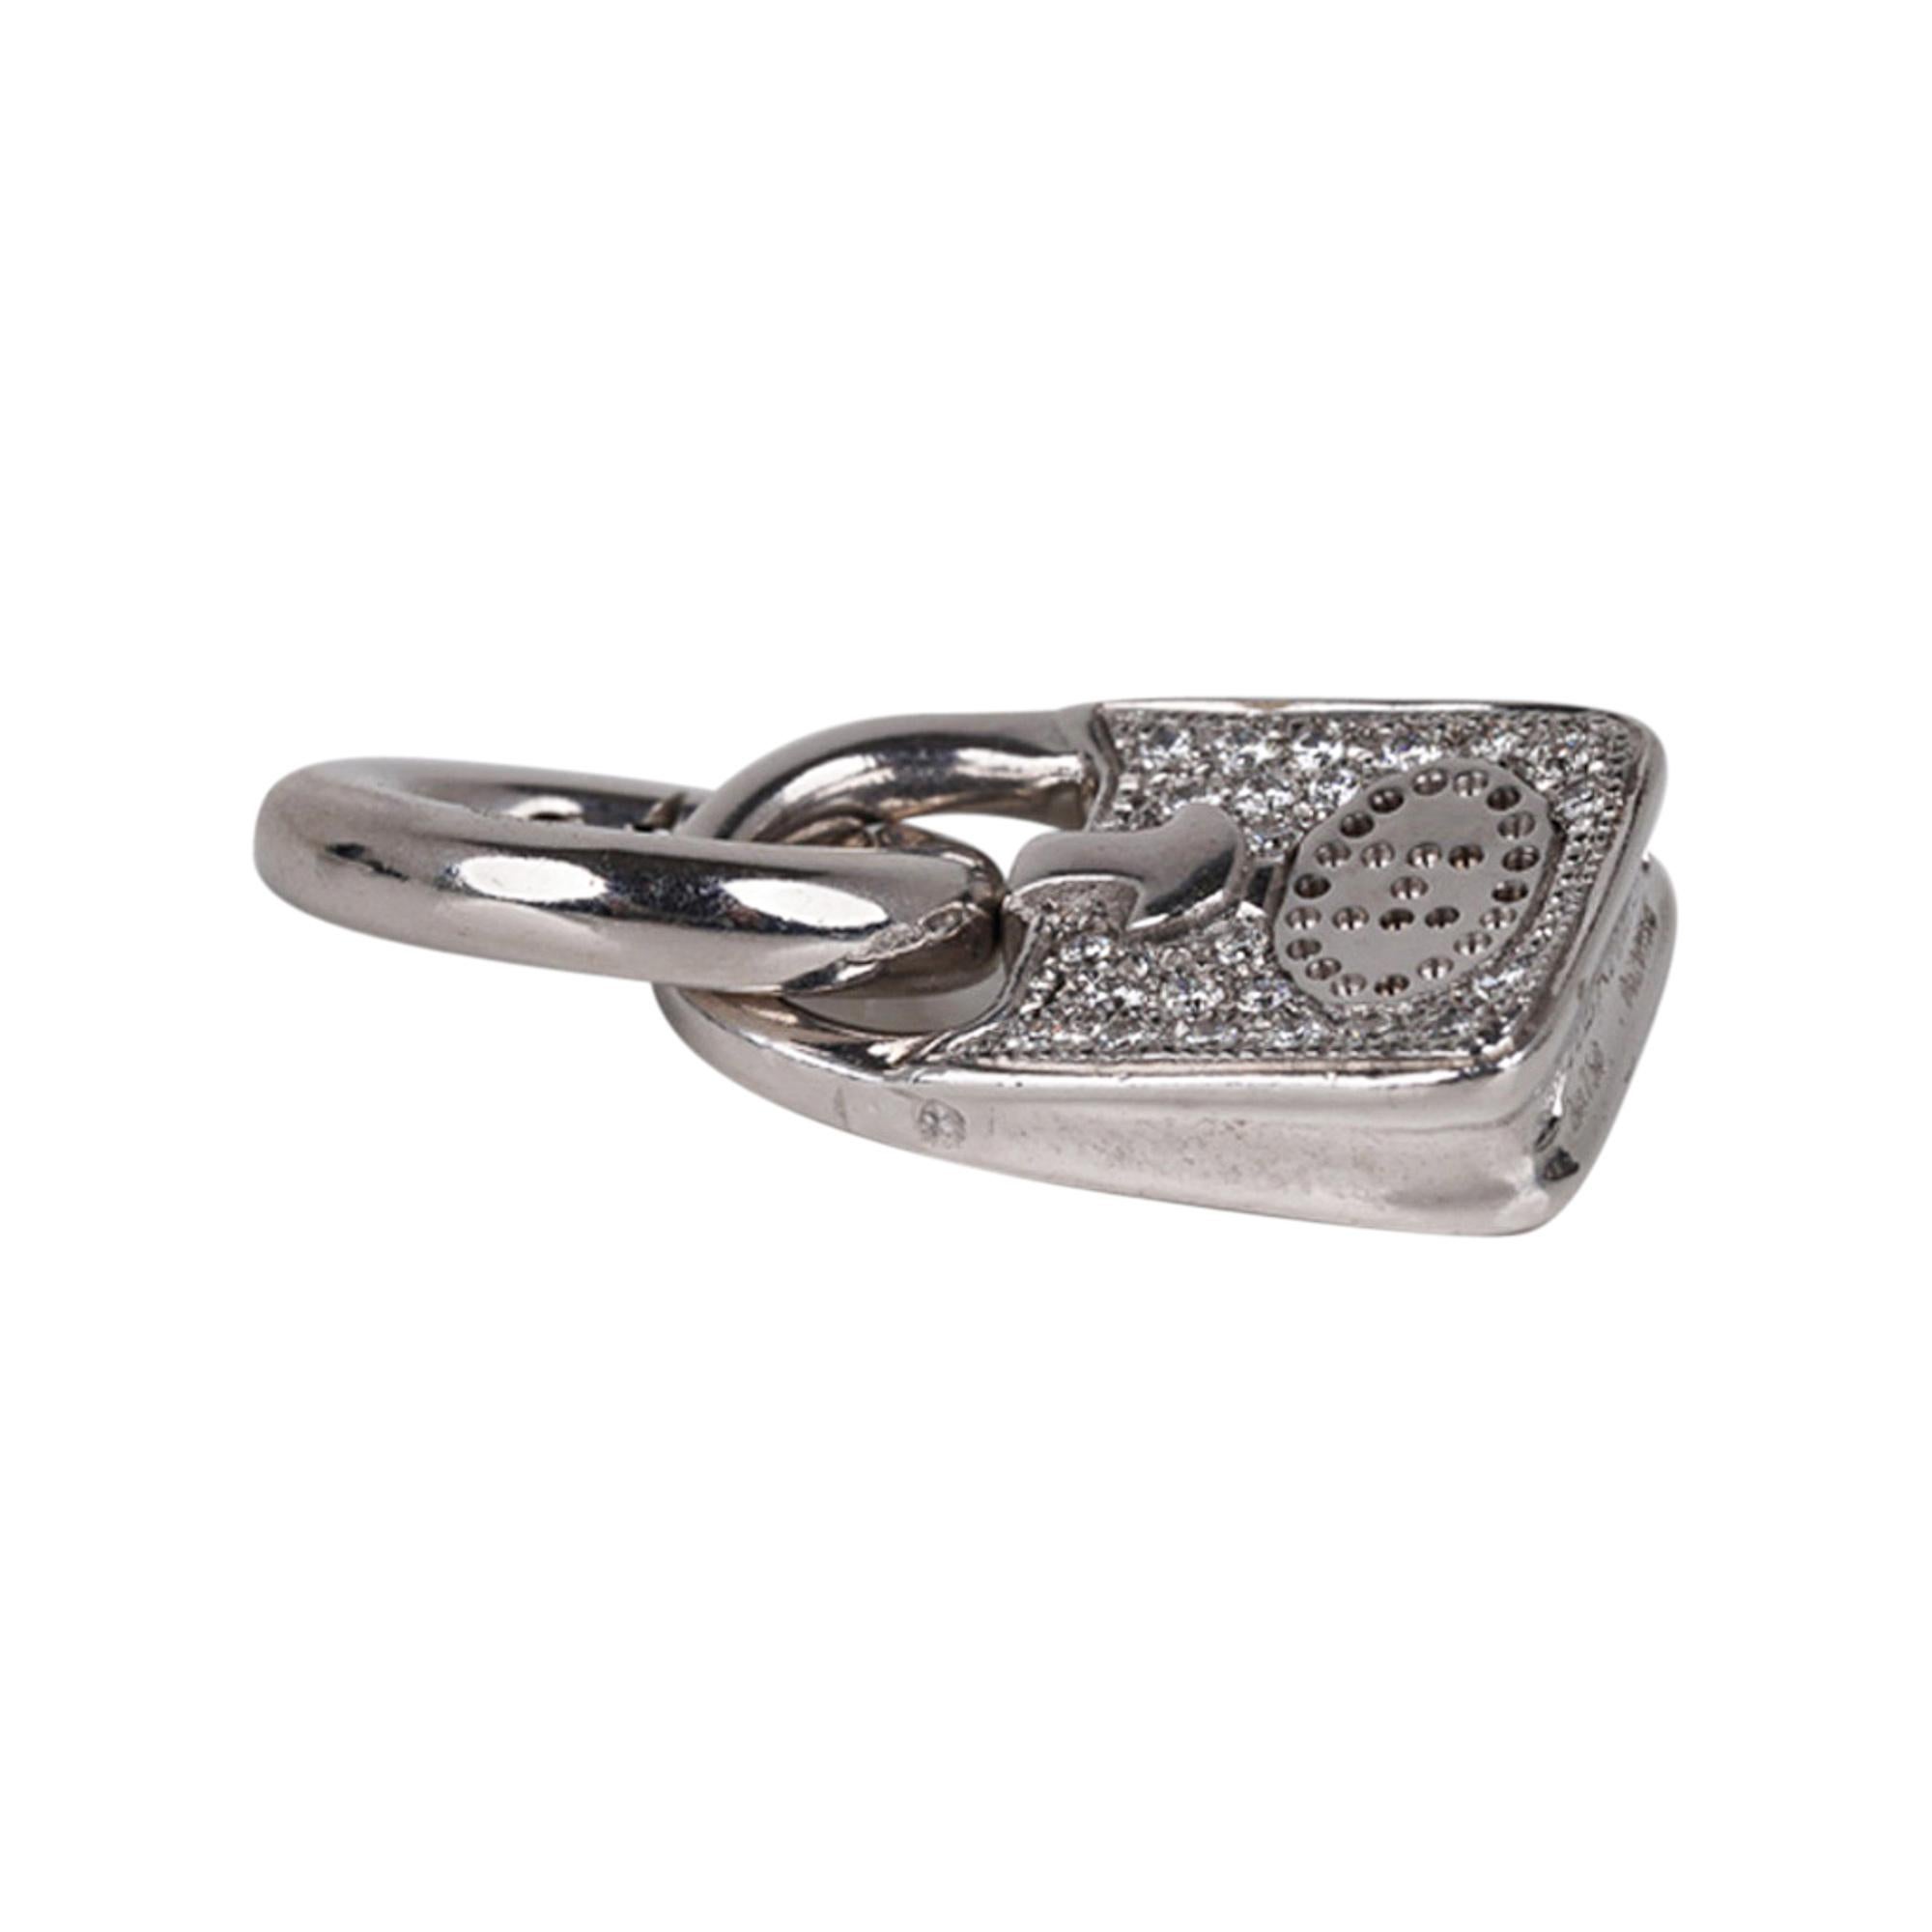 Hermes Diamond 18K White Gold Evelyne Bag Amulette / Charm Very Rare New In New Condition For Sale In Miami, FL